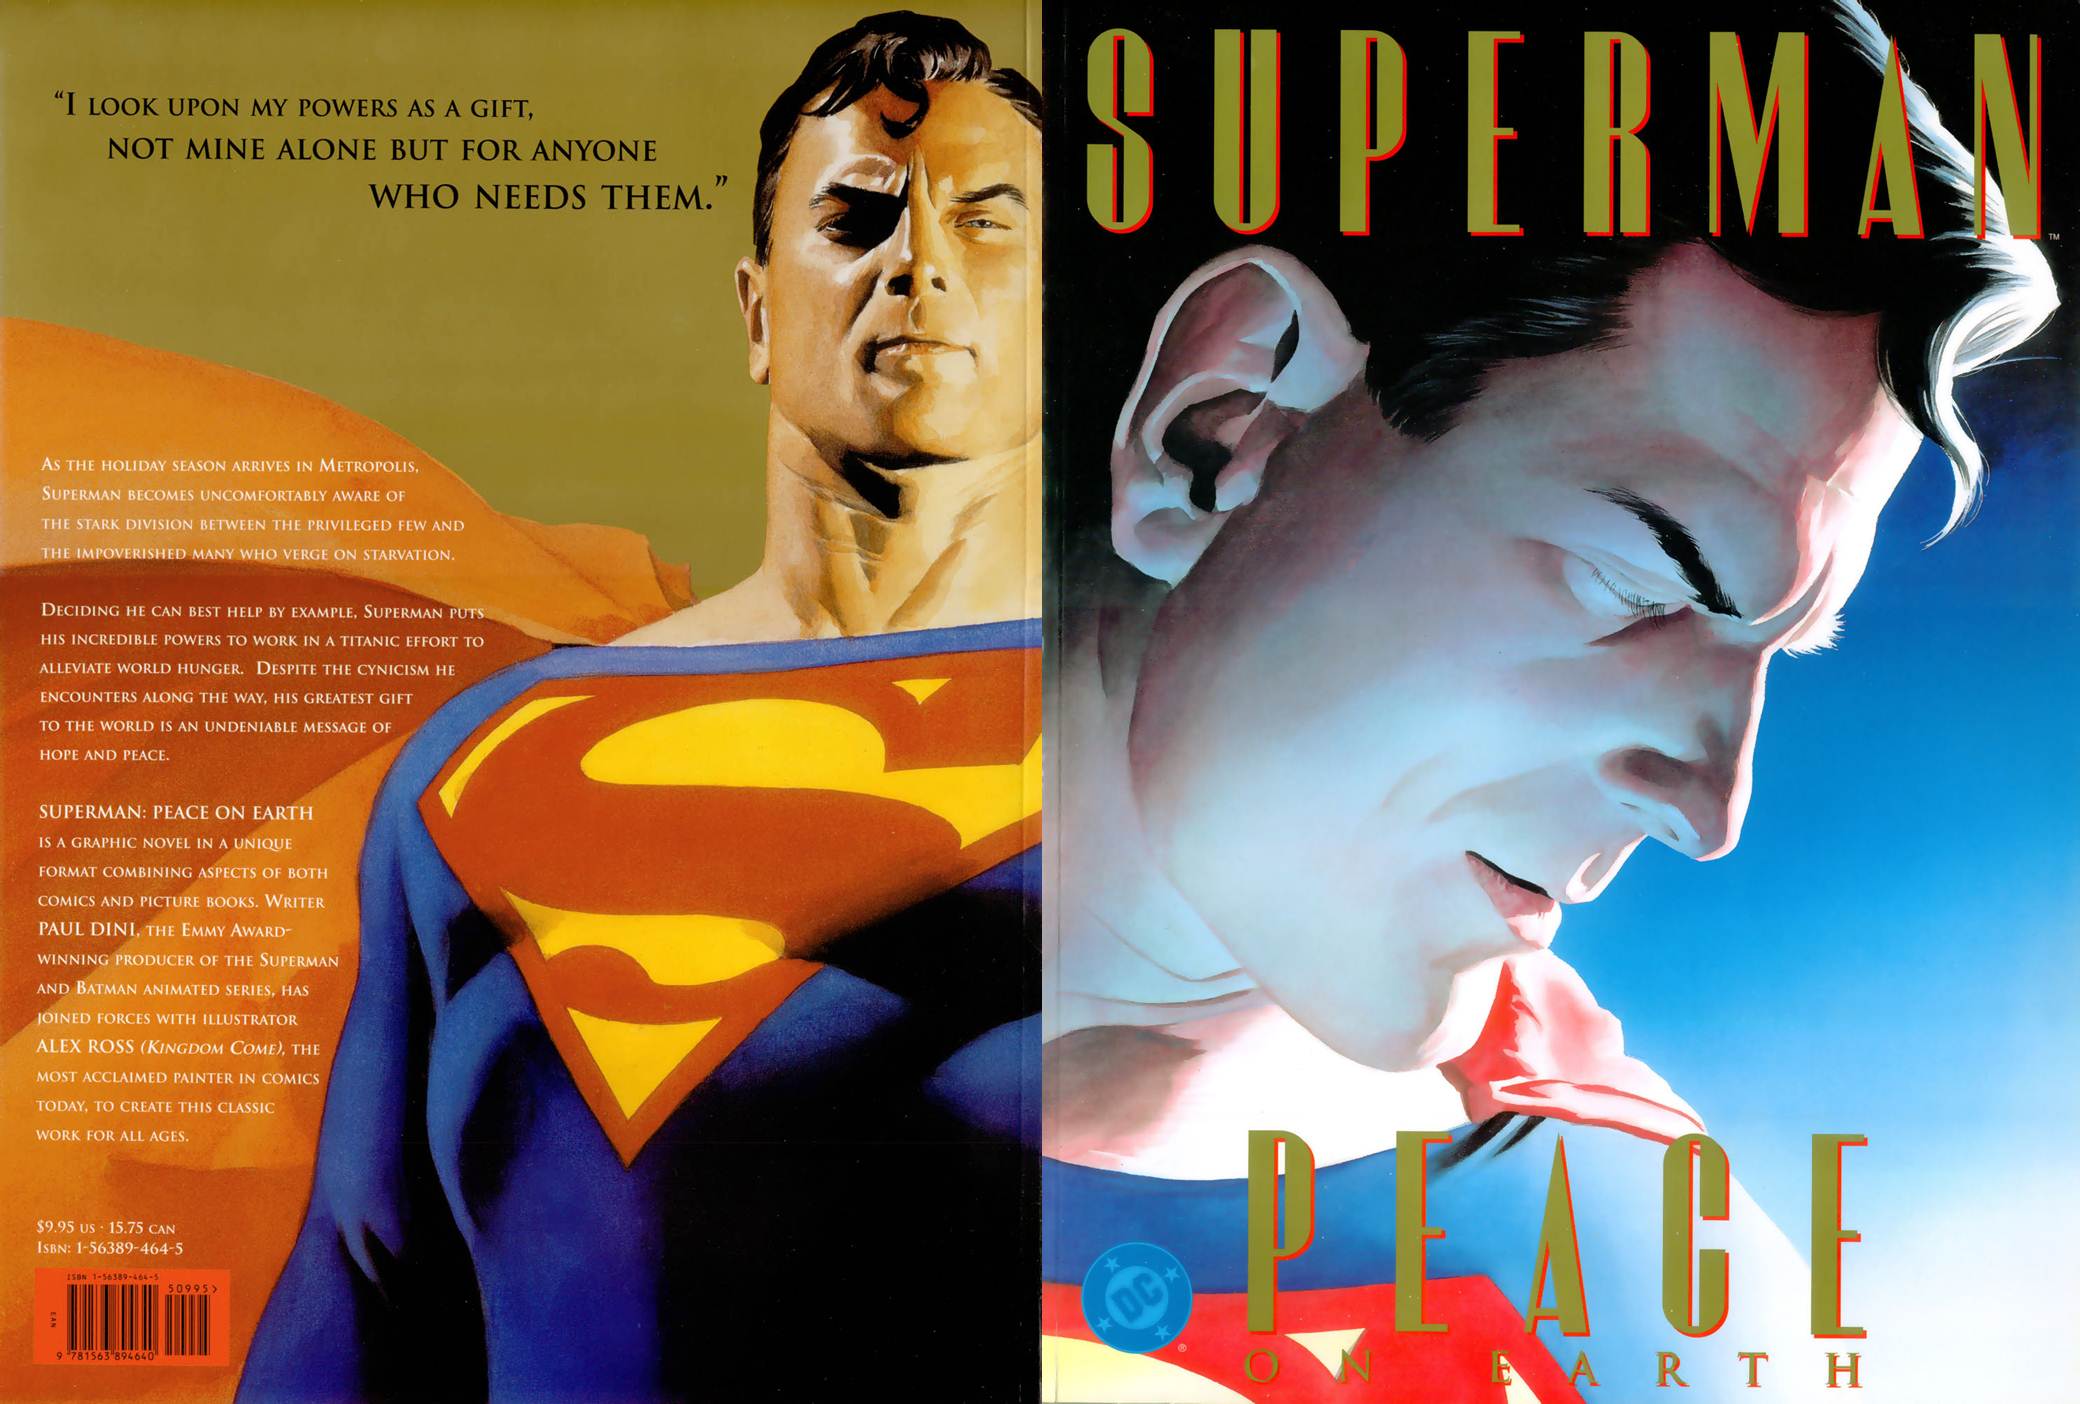 superman peace on earth cbr download torrent